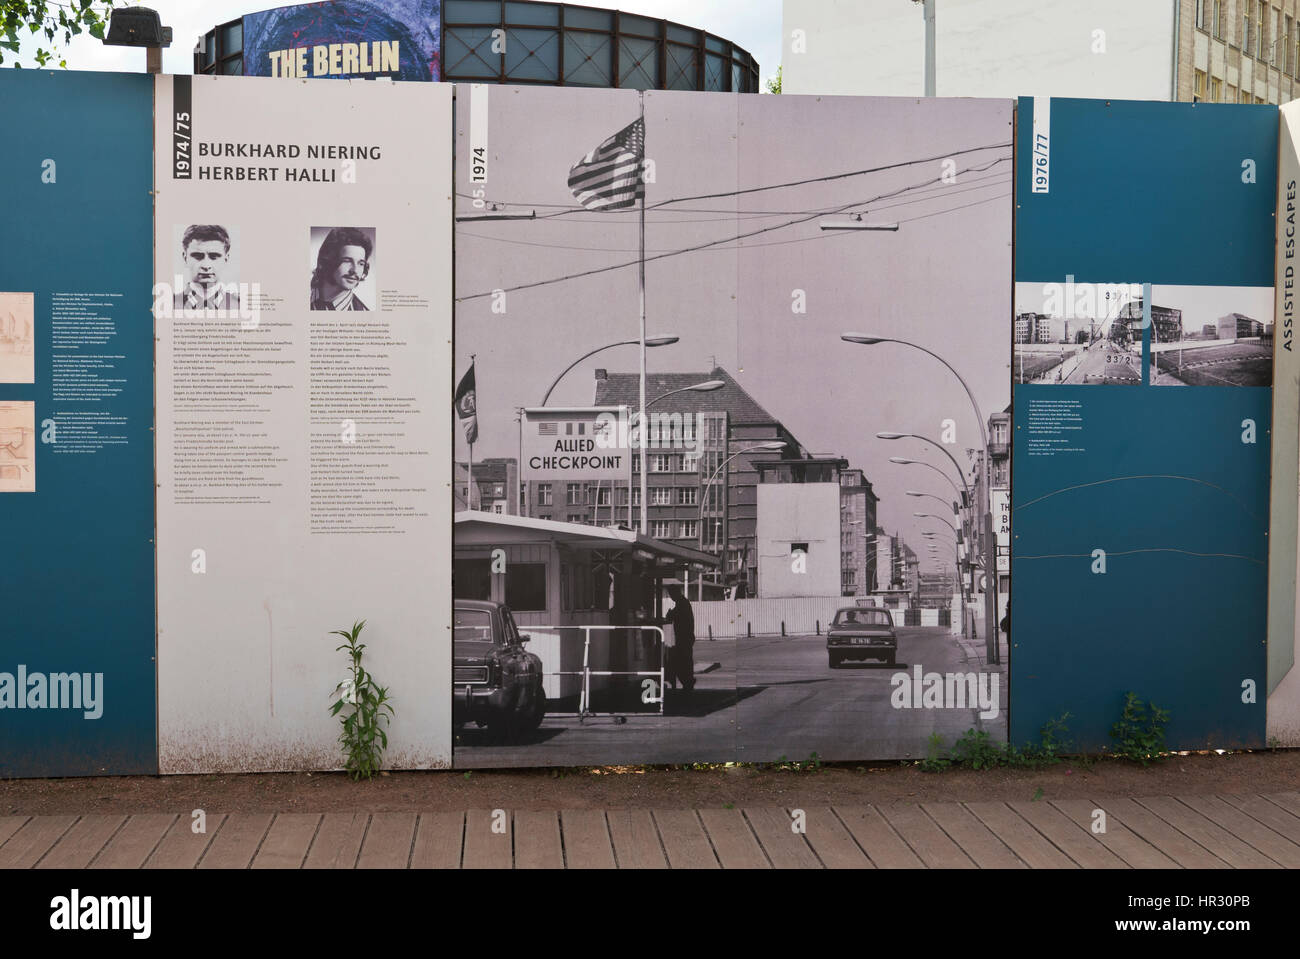 Large posters on display about the CheckPoint Charlie Guard Post, Berlin, Germany Stock Photo